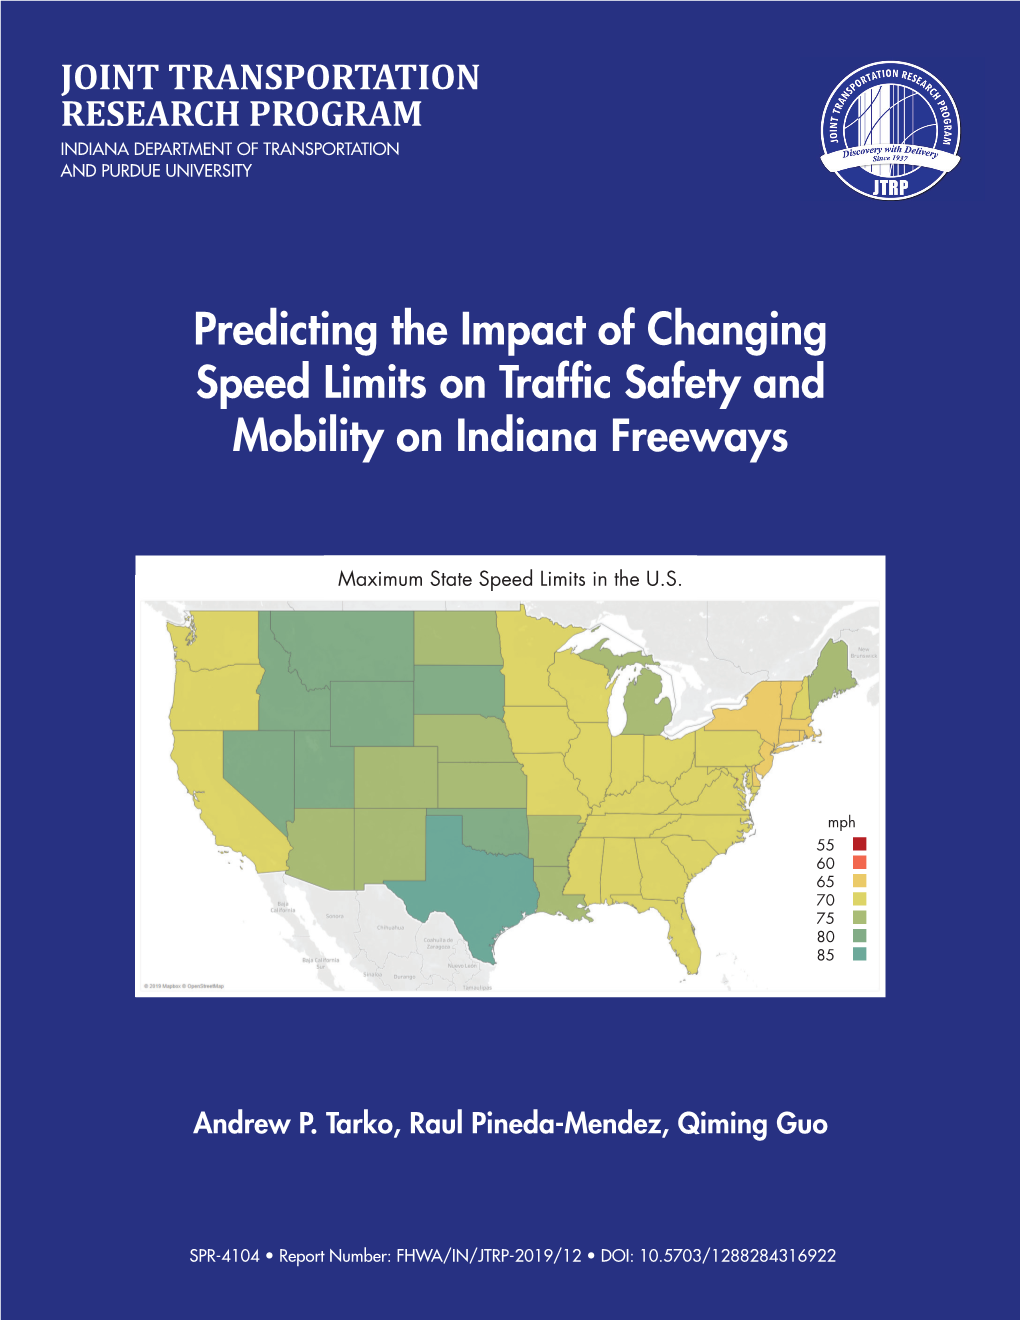 Predicting the Impact of Changing Speed Limits on Traffic Safety and Mobility on May 2019 Indiana Freeways 6